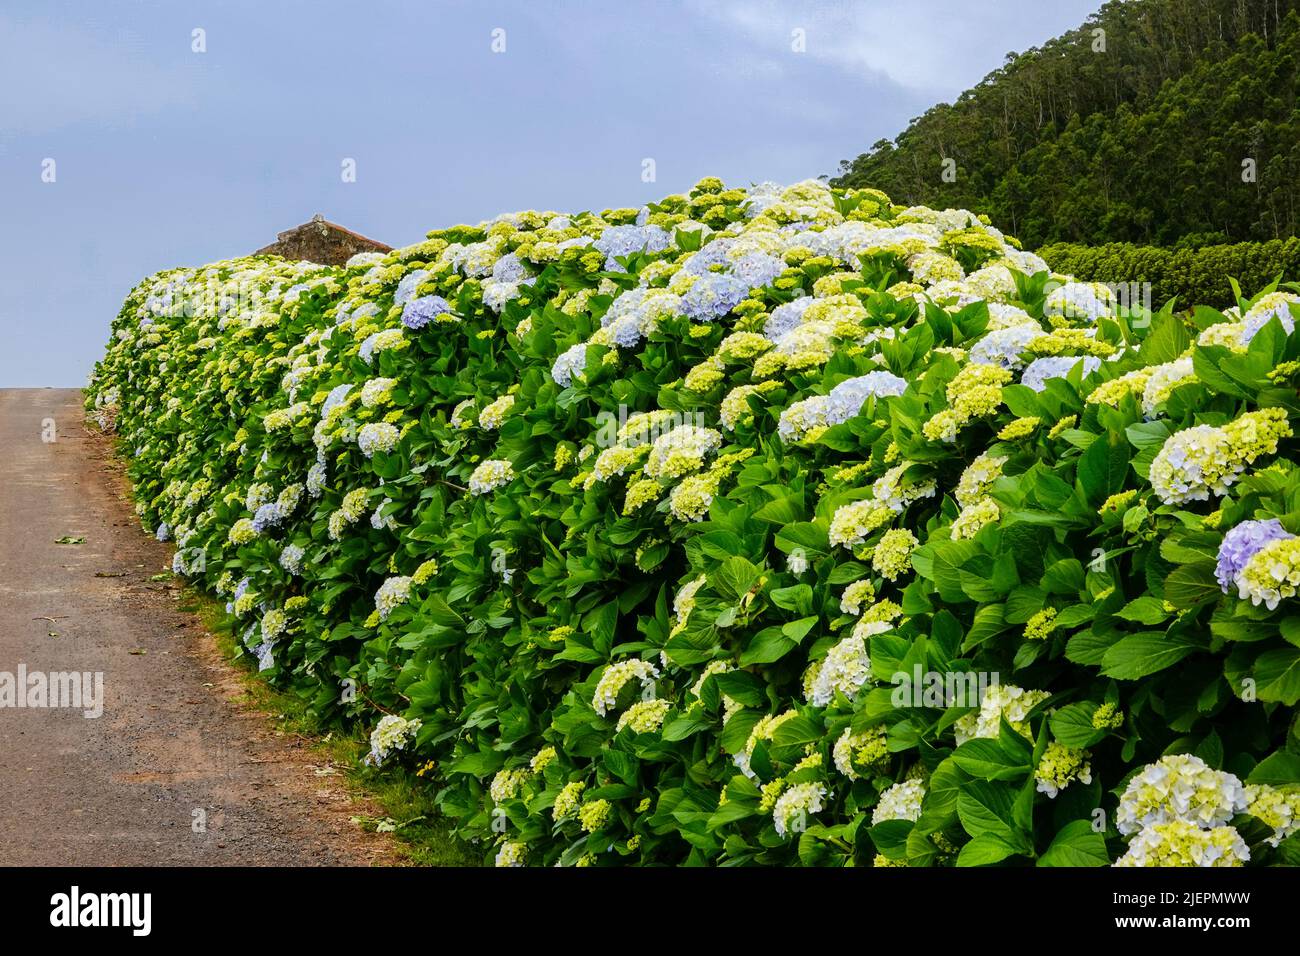 A country road framed by Hydrangea flowers near Agualva, Terceira Island, Azores, Portugal. The tiny Azores are covered by wild hydrangea shrubs considered the national flower. Stock Photo